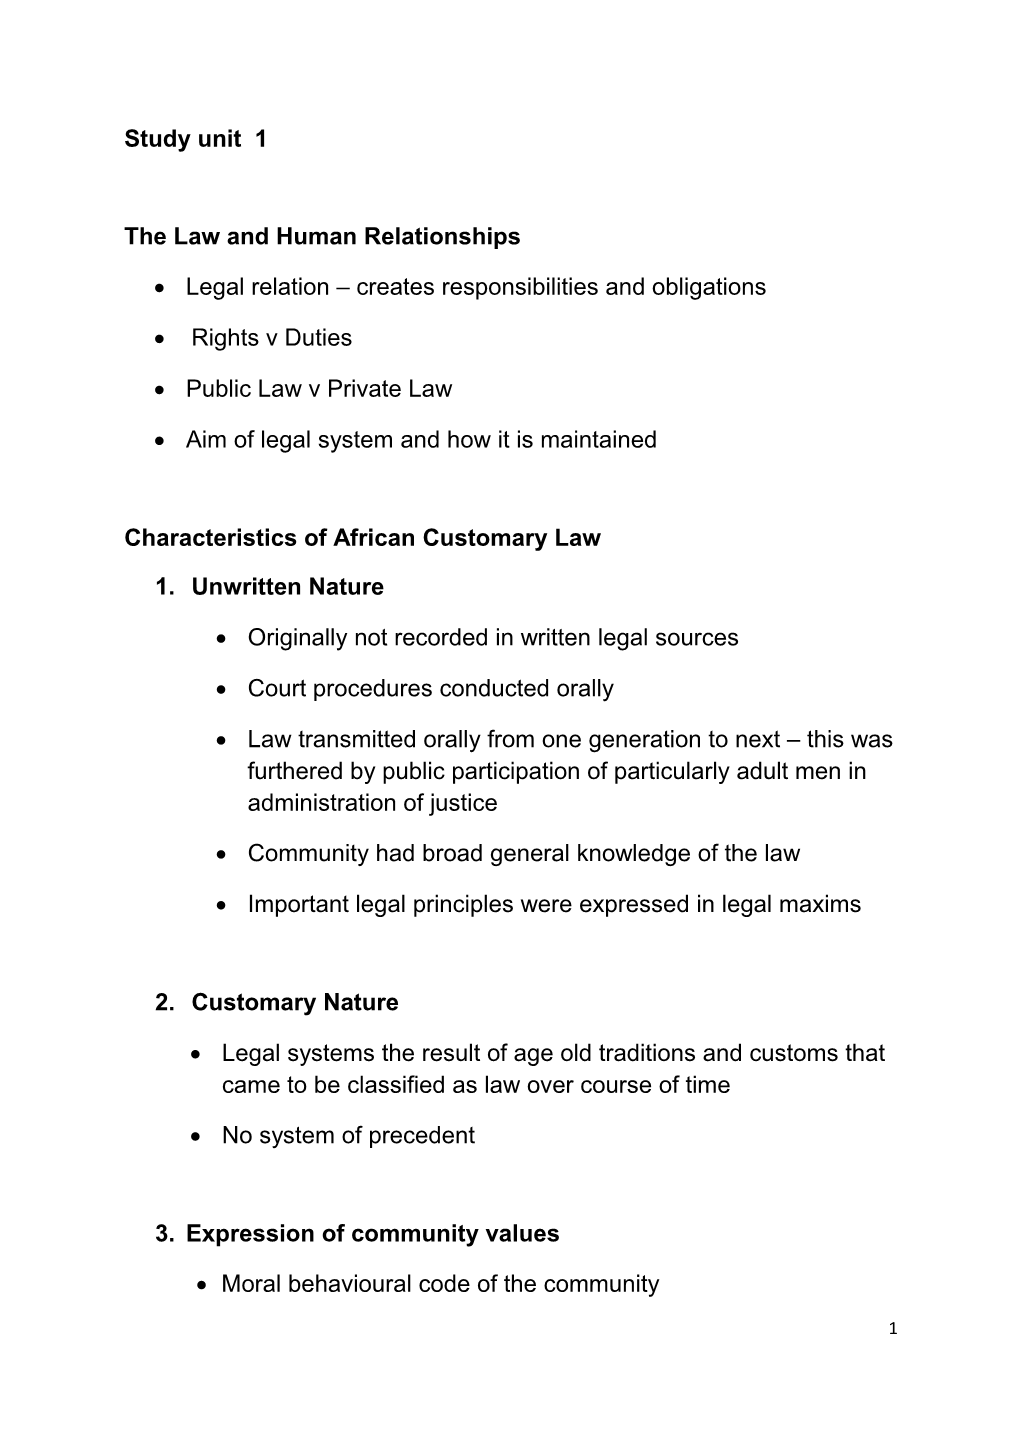 The Law and Human Relationships